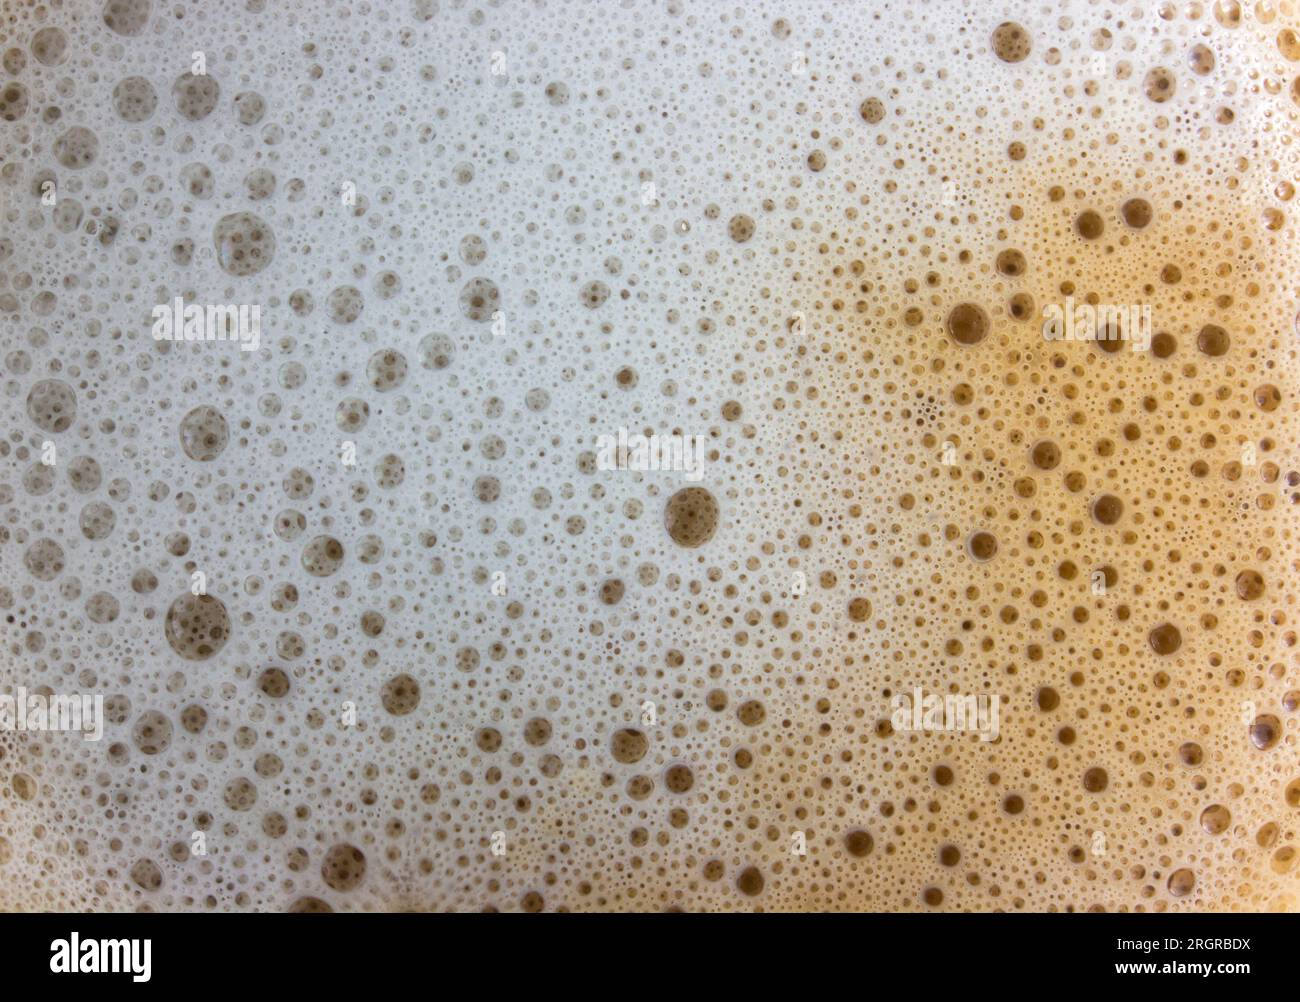 https://c8.alamy.com/comp/2RGRBDX/cappuccino-foam-background-close-up-coffee-with-whipped-milk-top-view-of-a-cup-with-a-coffee-drink-2RGRBDX.jpg